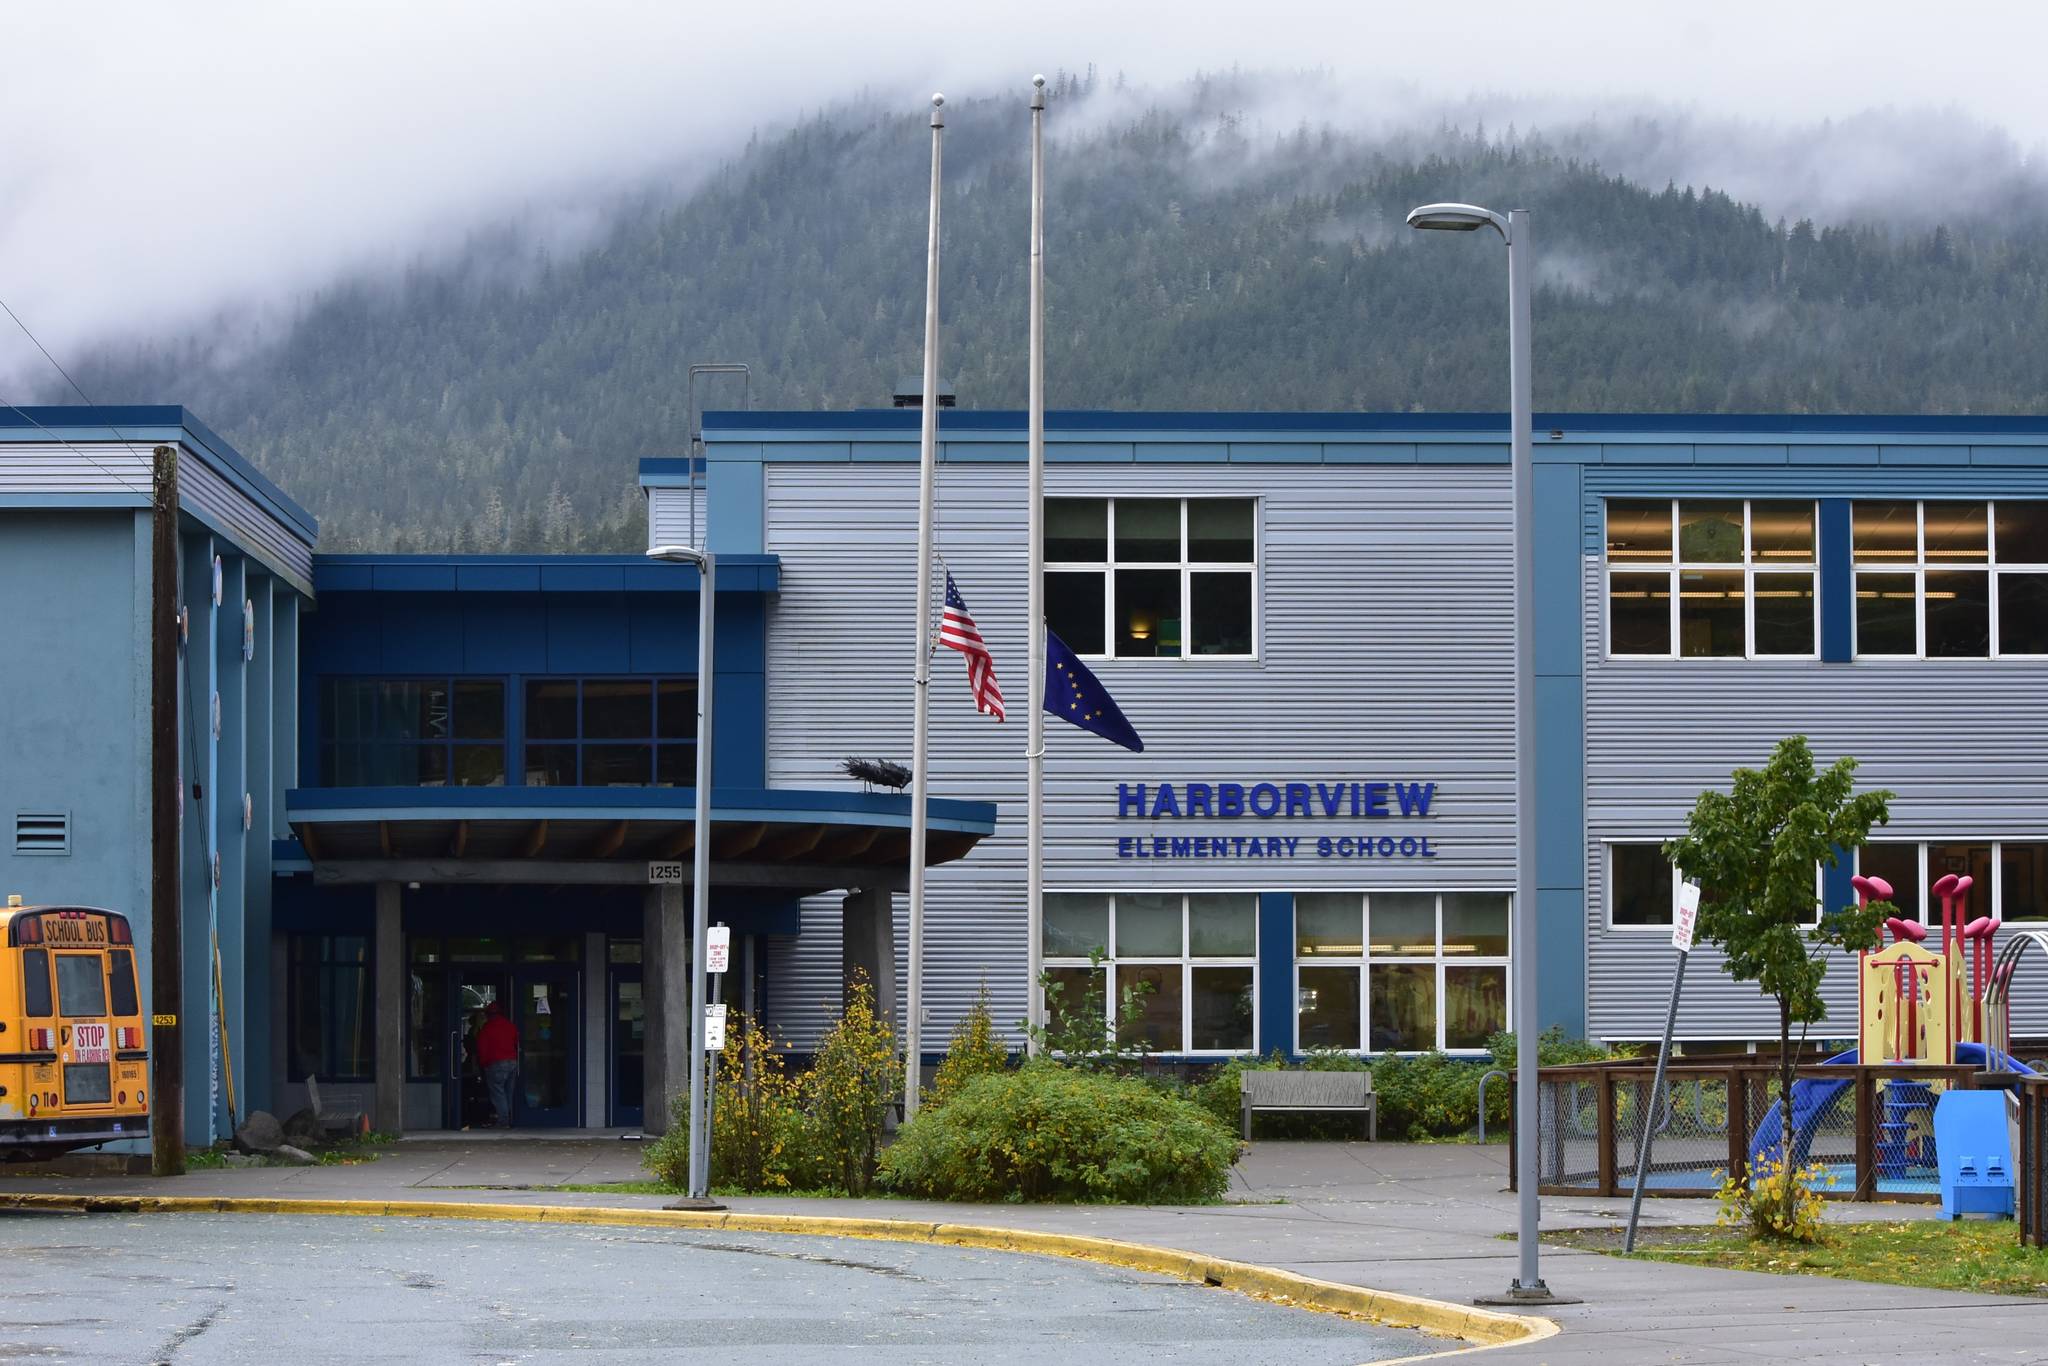 The second of two summer school terms offered by the Juneau School District started on July 6. Harborview School, shown here in May 2020, is one of the locations offering the program. Summer sessions offer an opportunity for students to brush up on content they may have missed over three semesters marked by COVID-19-related schedule disruptions. (Peter Segall / Juneau Empire File)